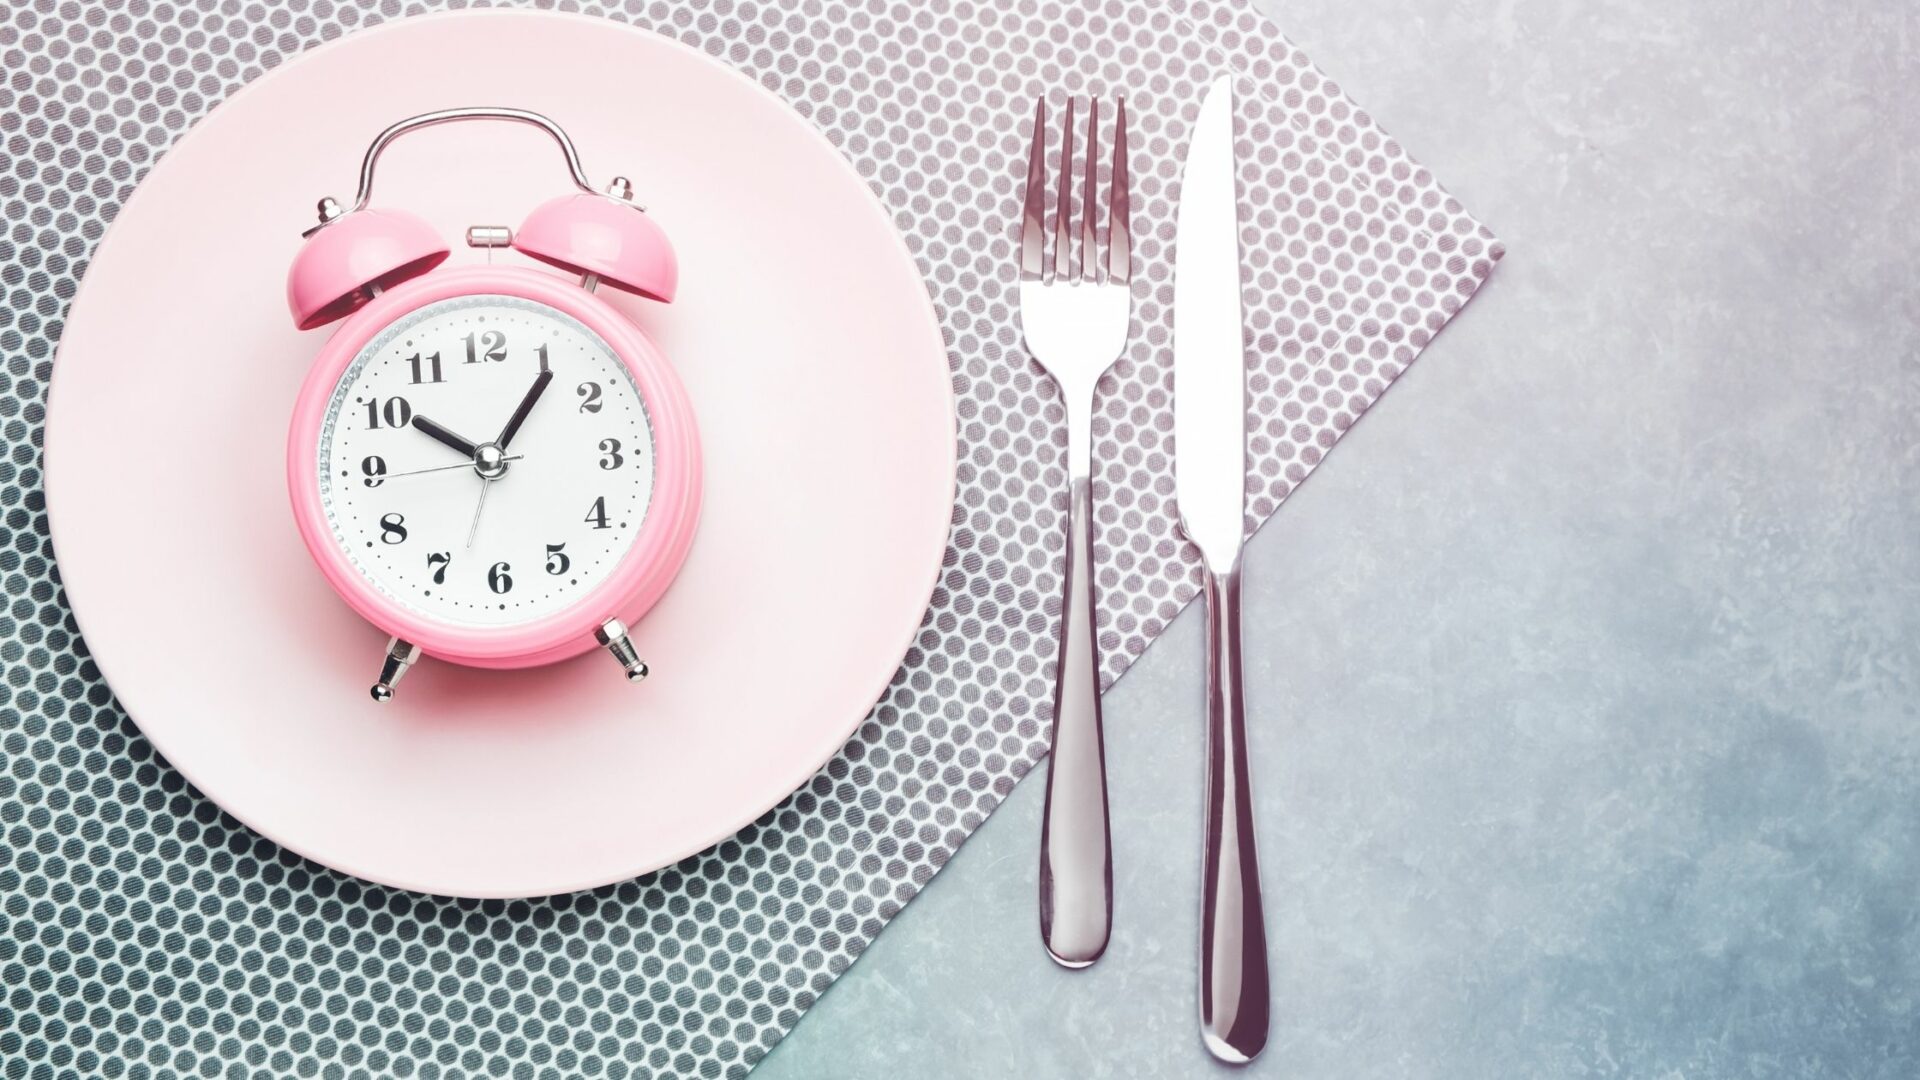 Is Intermittent Fasting Effective for Weightloss?